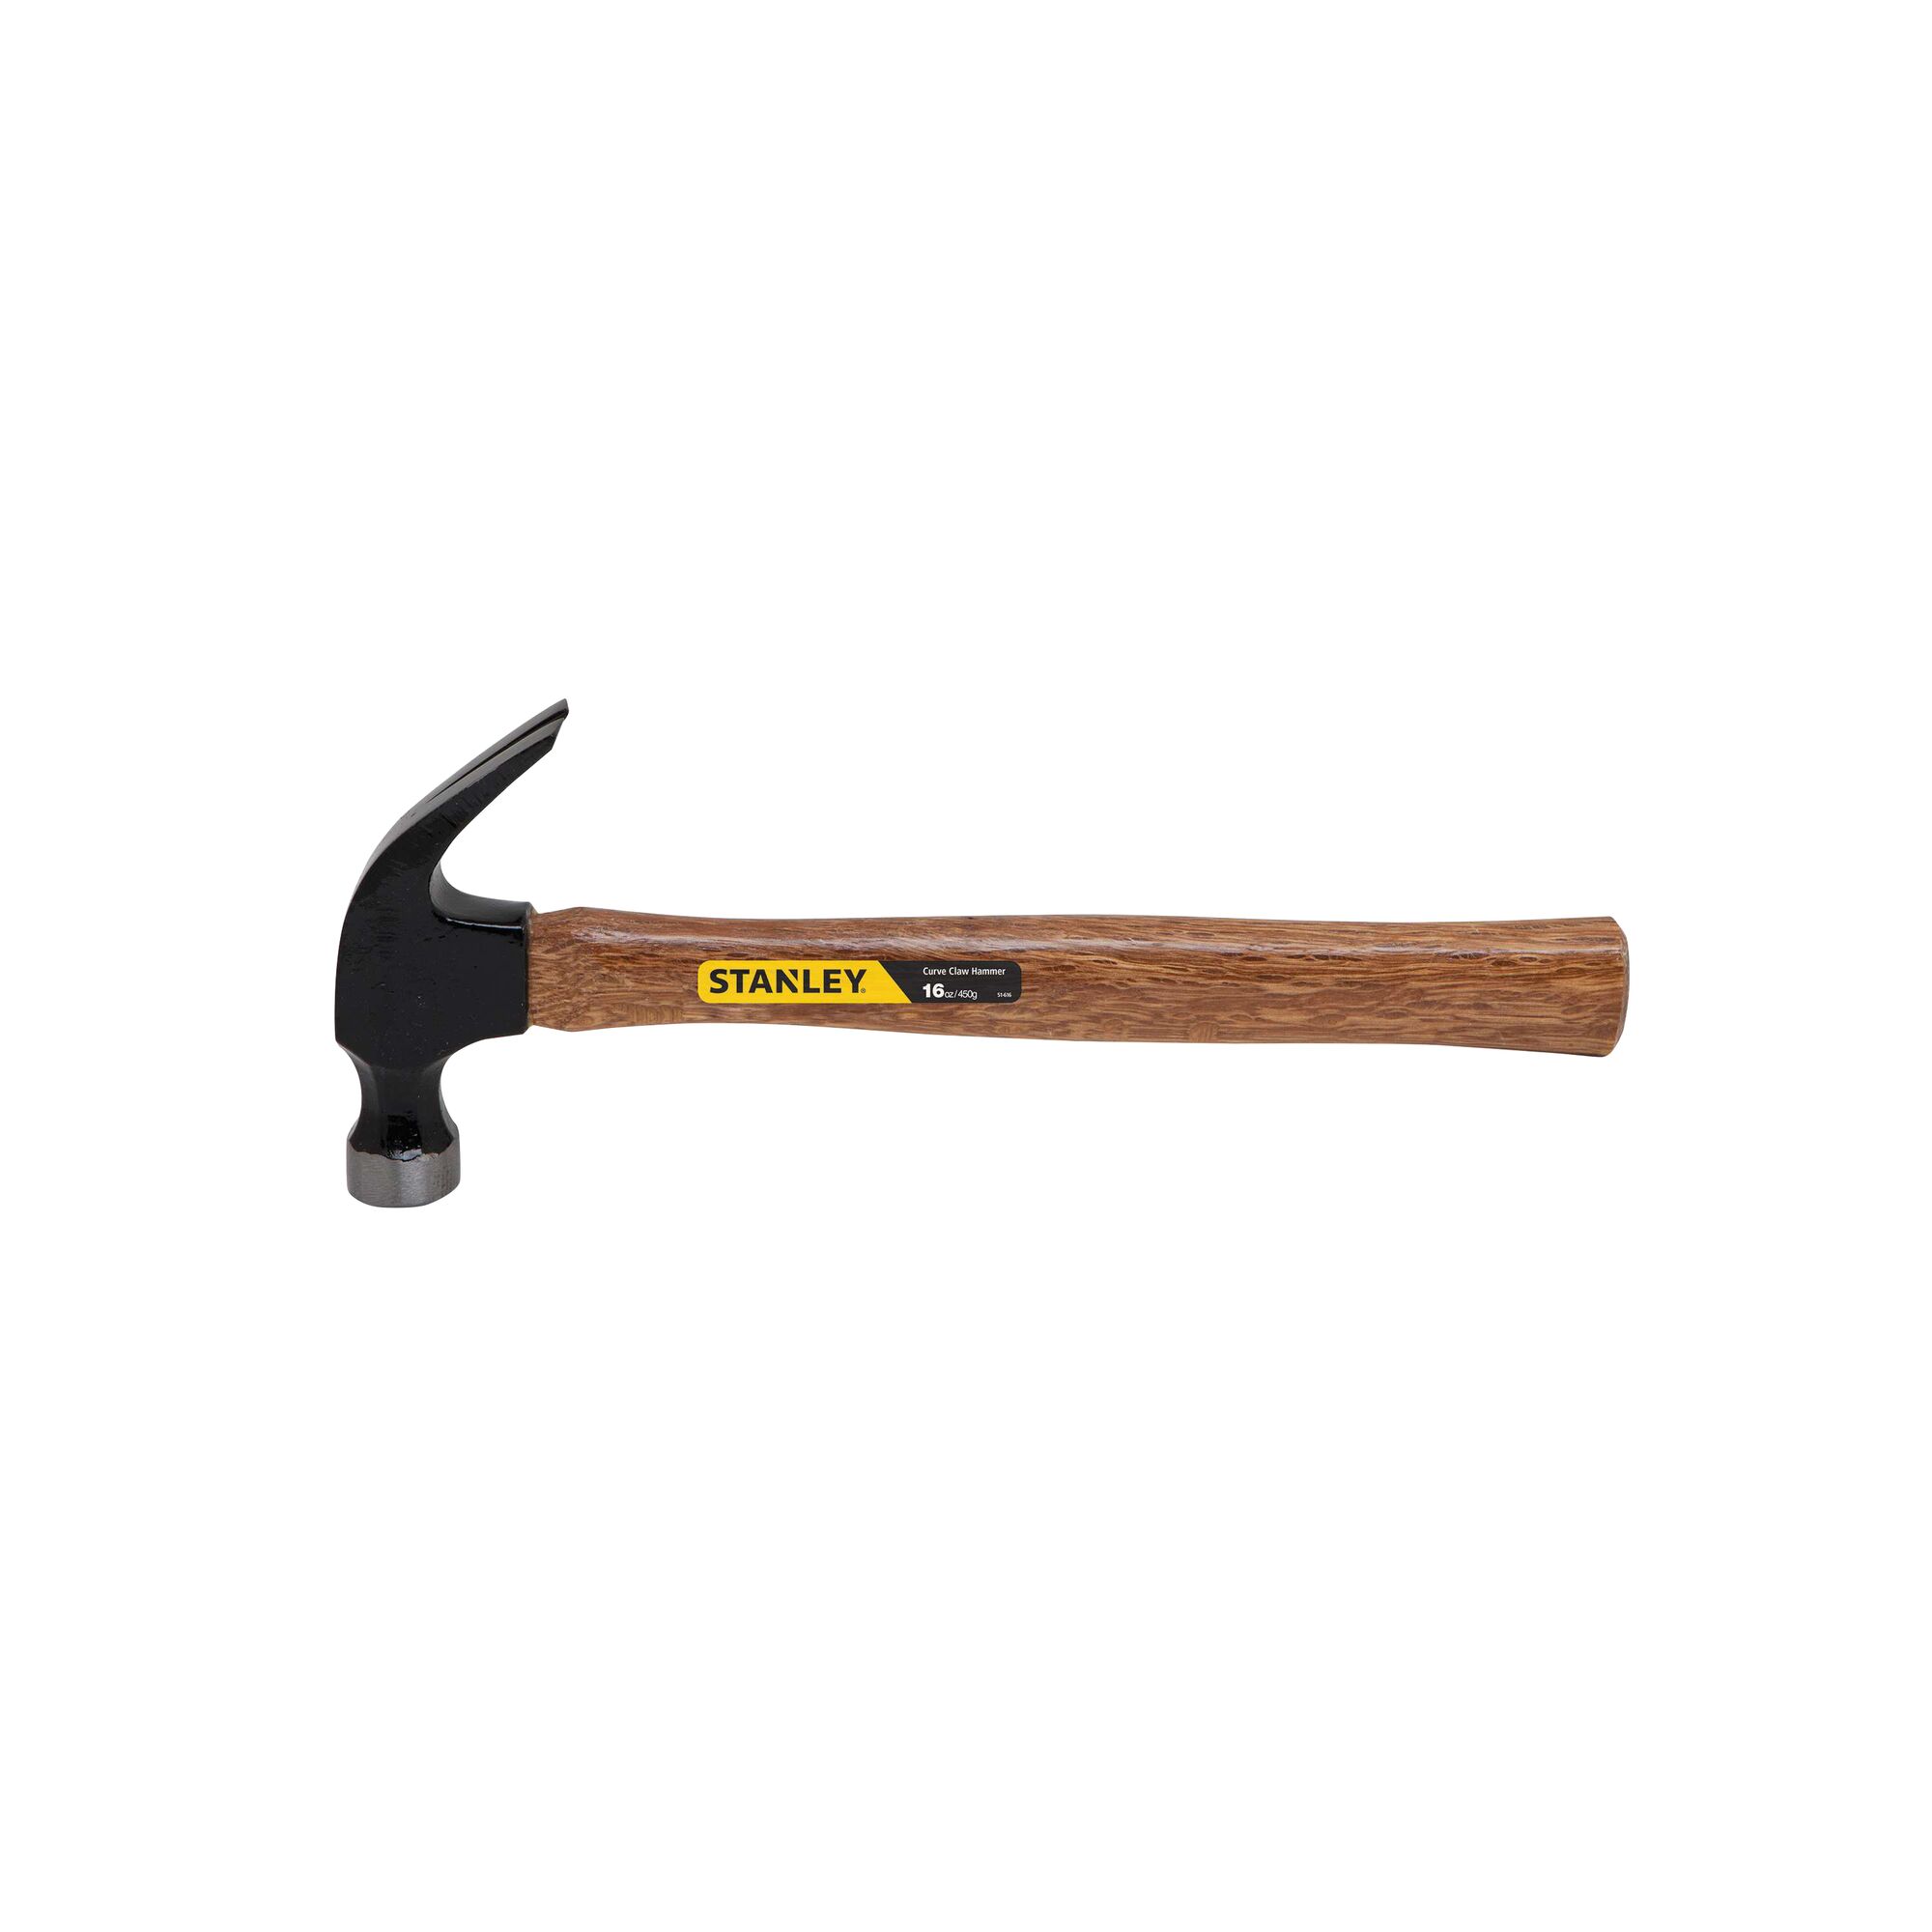 HICKORY NAIL HAMMER w/CURVE CLAW #51-416 NOS Stanley USA PRO WORKMASTER 16oz 